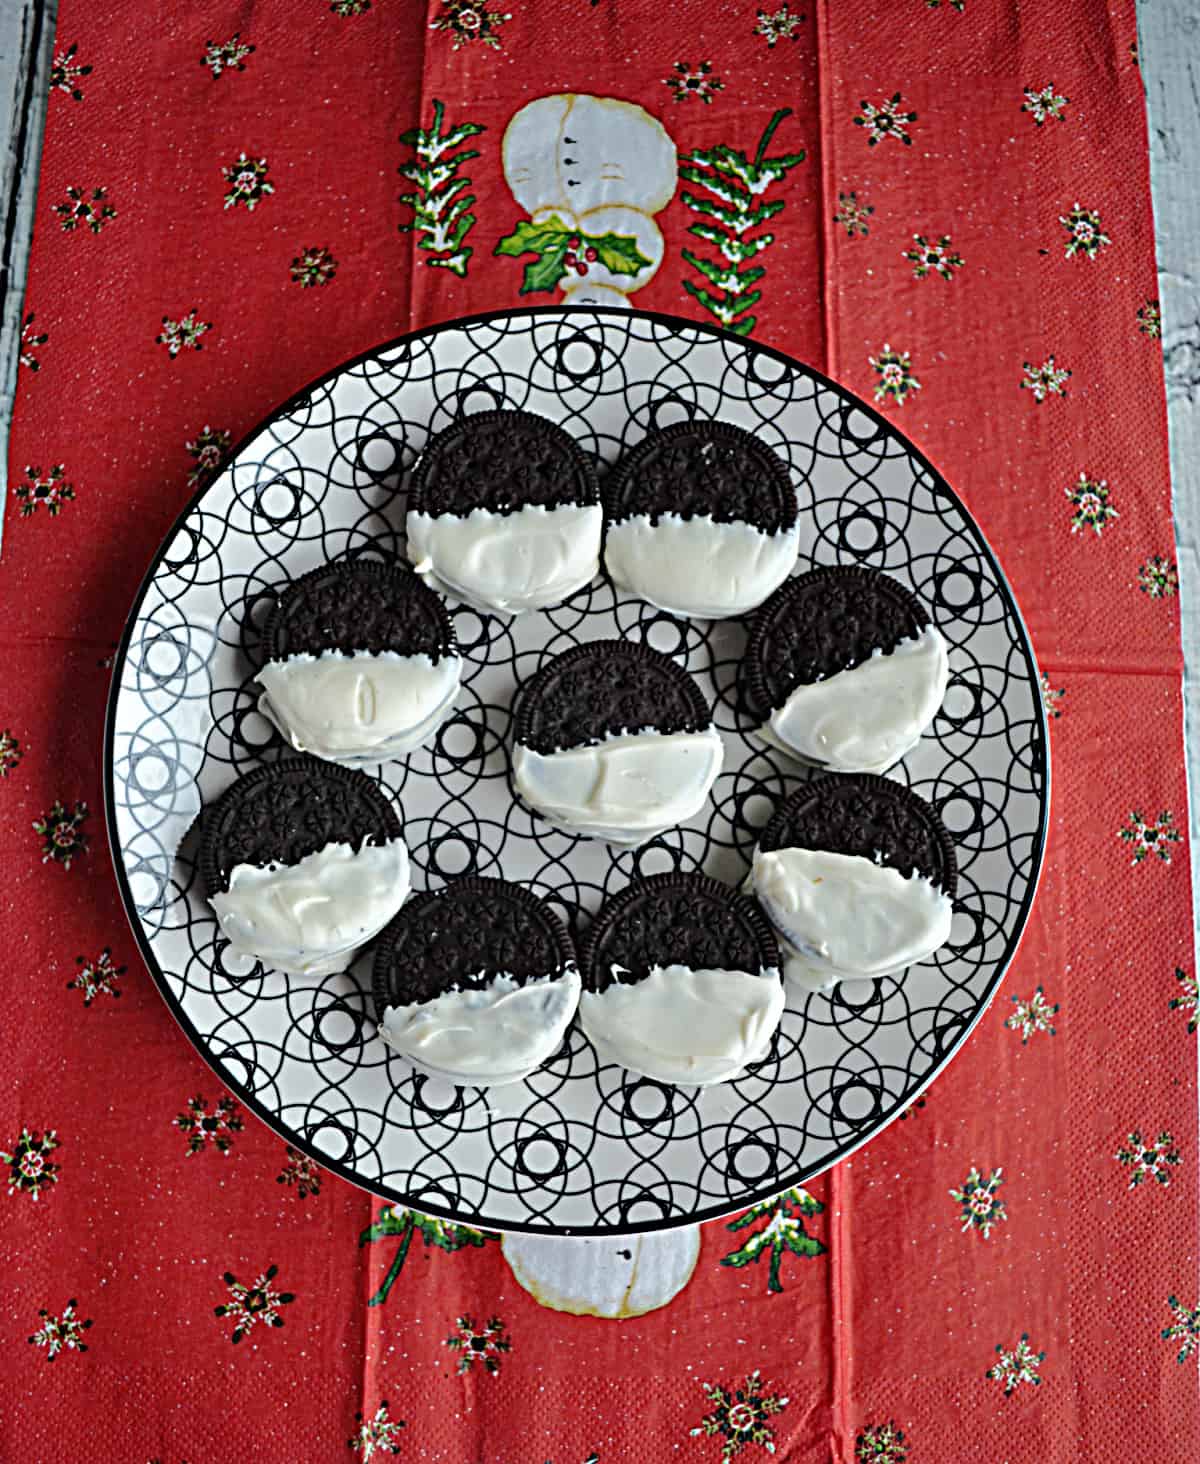 A plate of Oreos dipped in white chocolate.